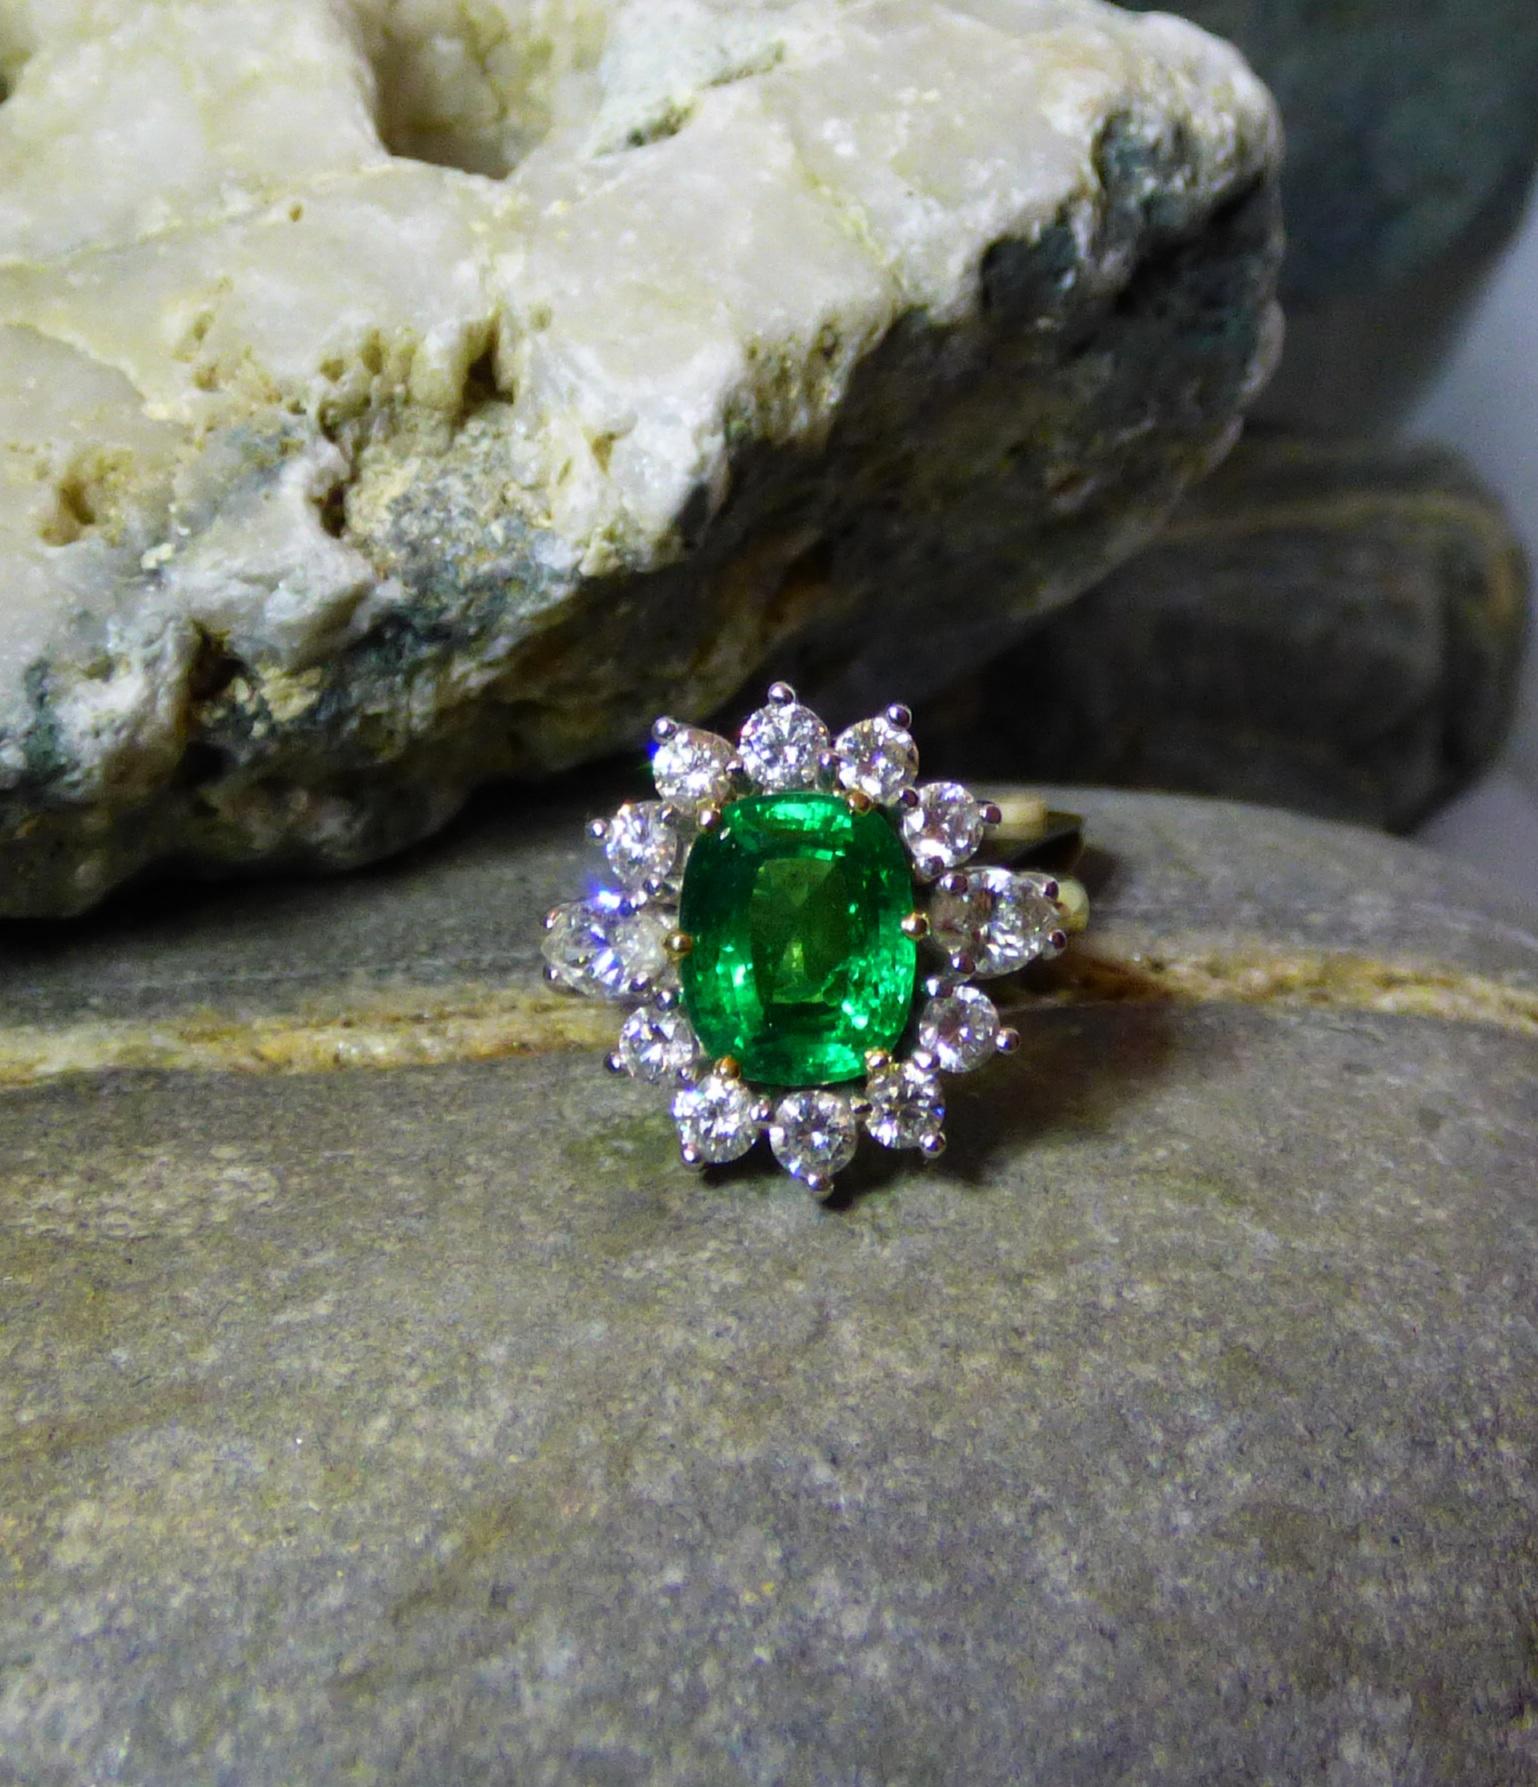 An exquisitely clean and bright  2.85ct. oval Emerald. This top grade colour of Emerald is an untreated natural stone.  A few minor inclusions are visible. The ring is also set with 10 round Diamonds (1.0ct.) and two marquise cut Diamonds (.66ct.).